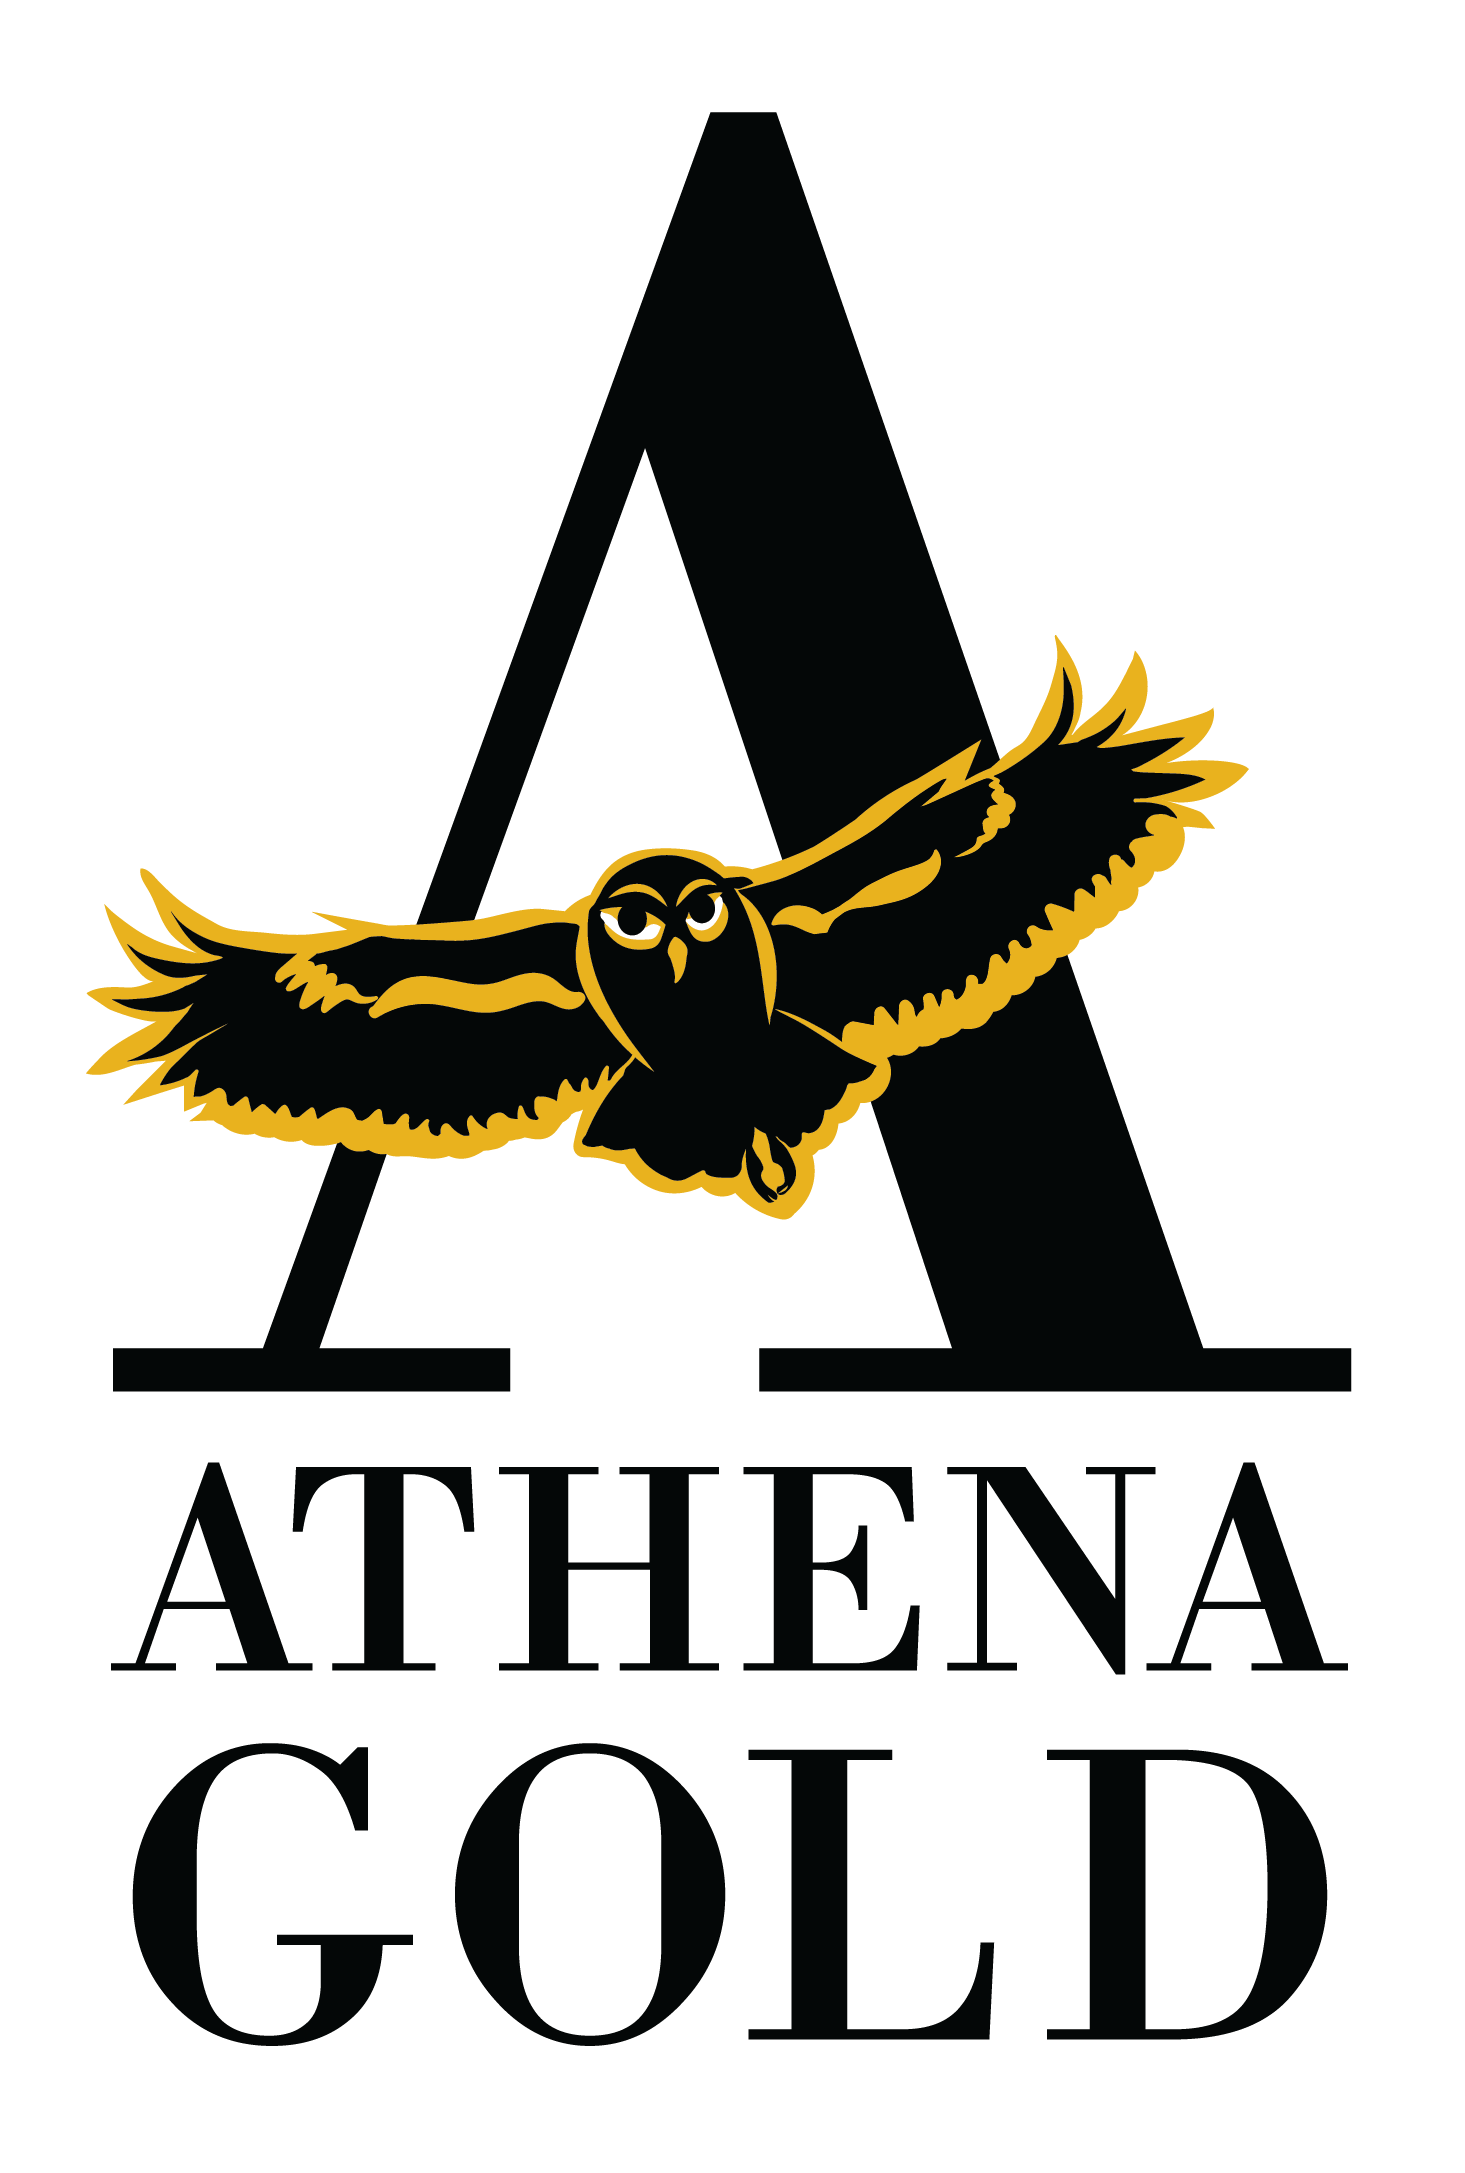 Athena Gold Corporation, Tuesday, October 12, 2021, Press release picture